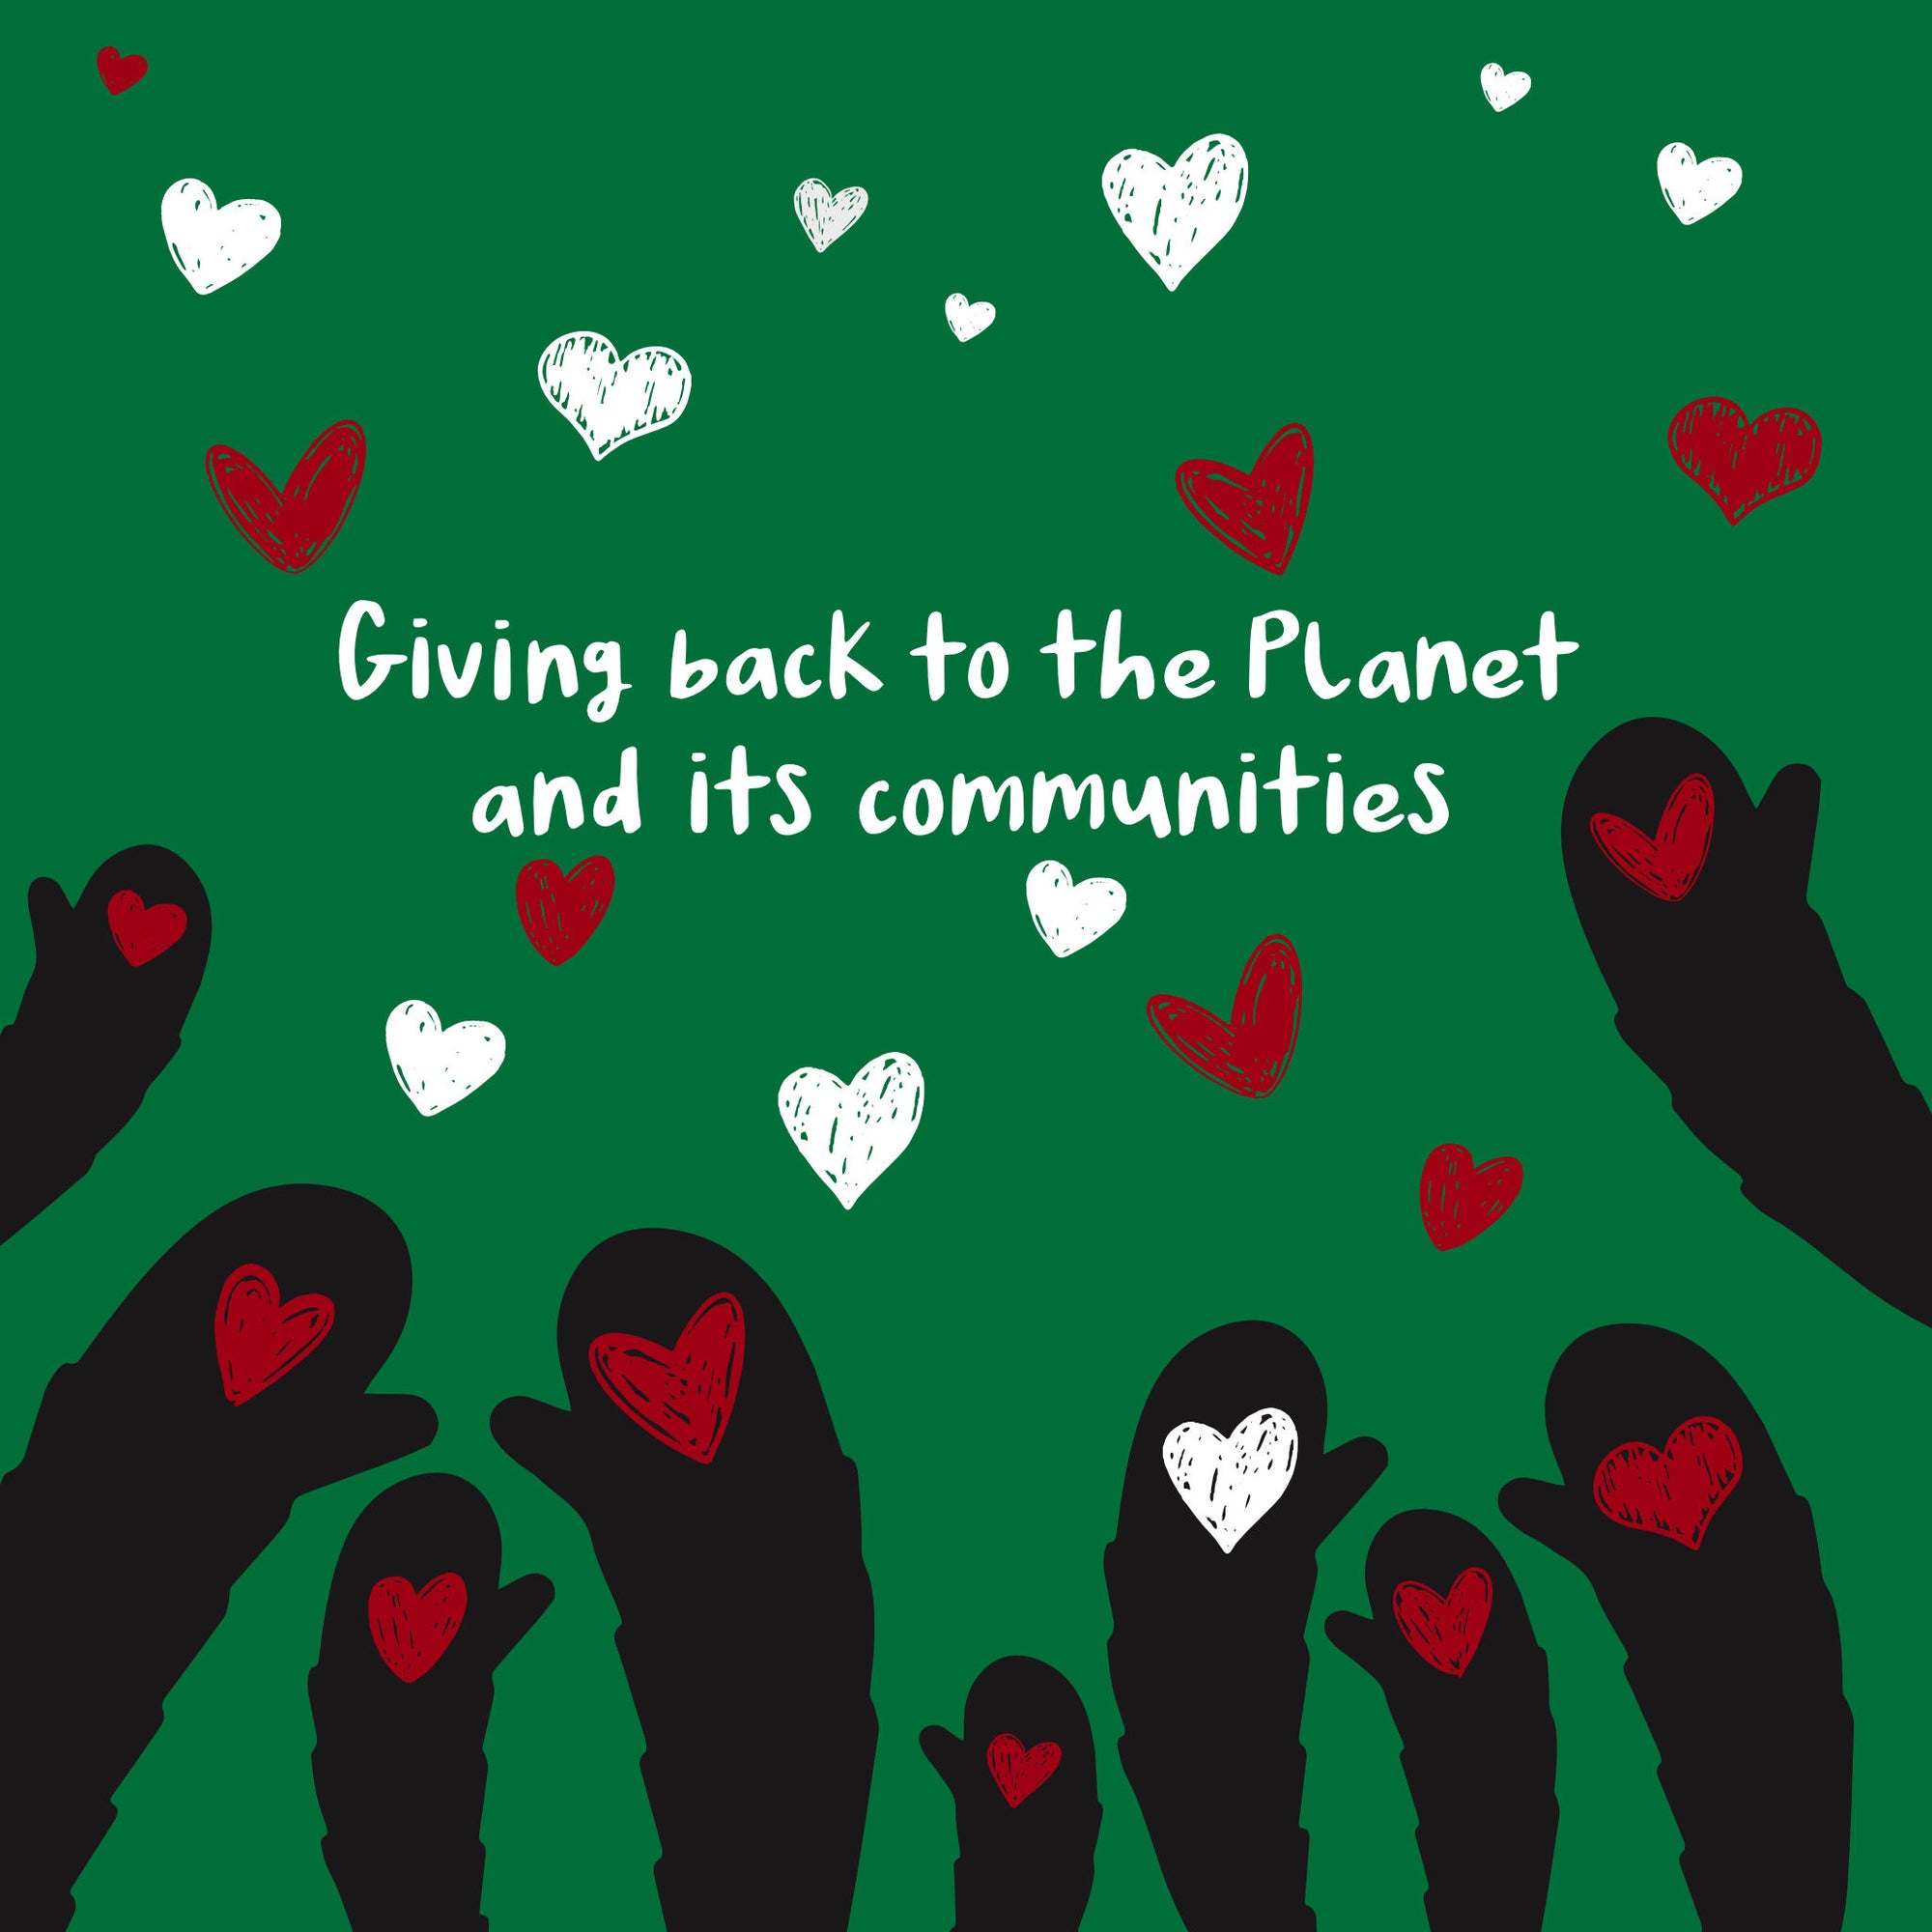 Giving back to the planet and its communities.